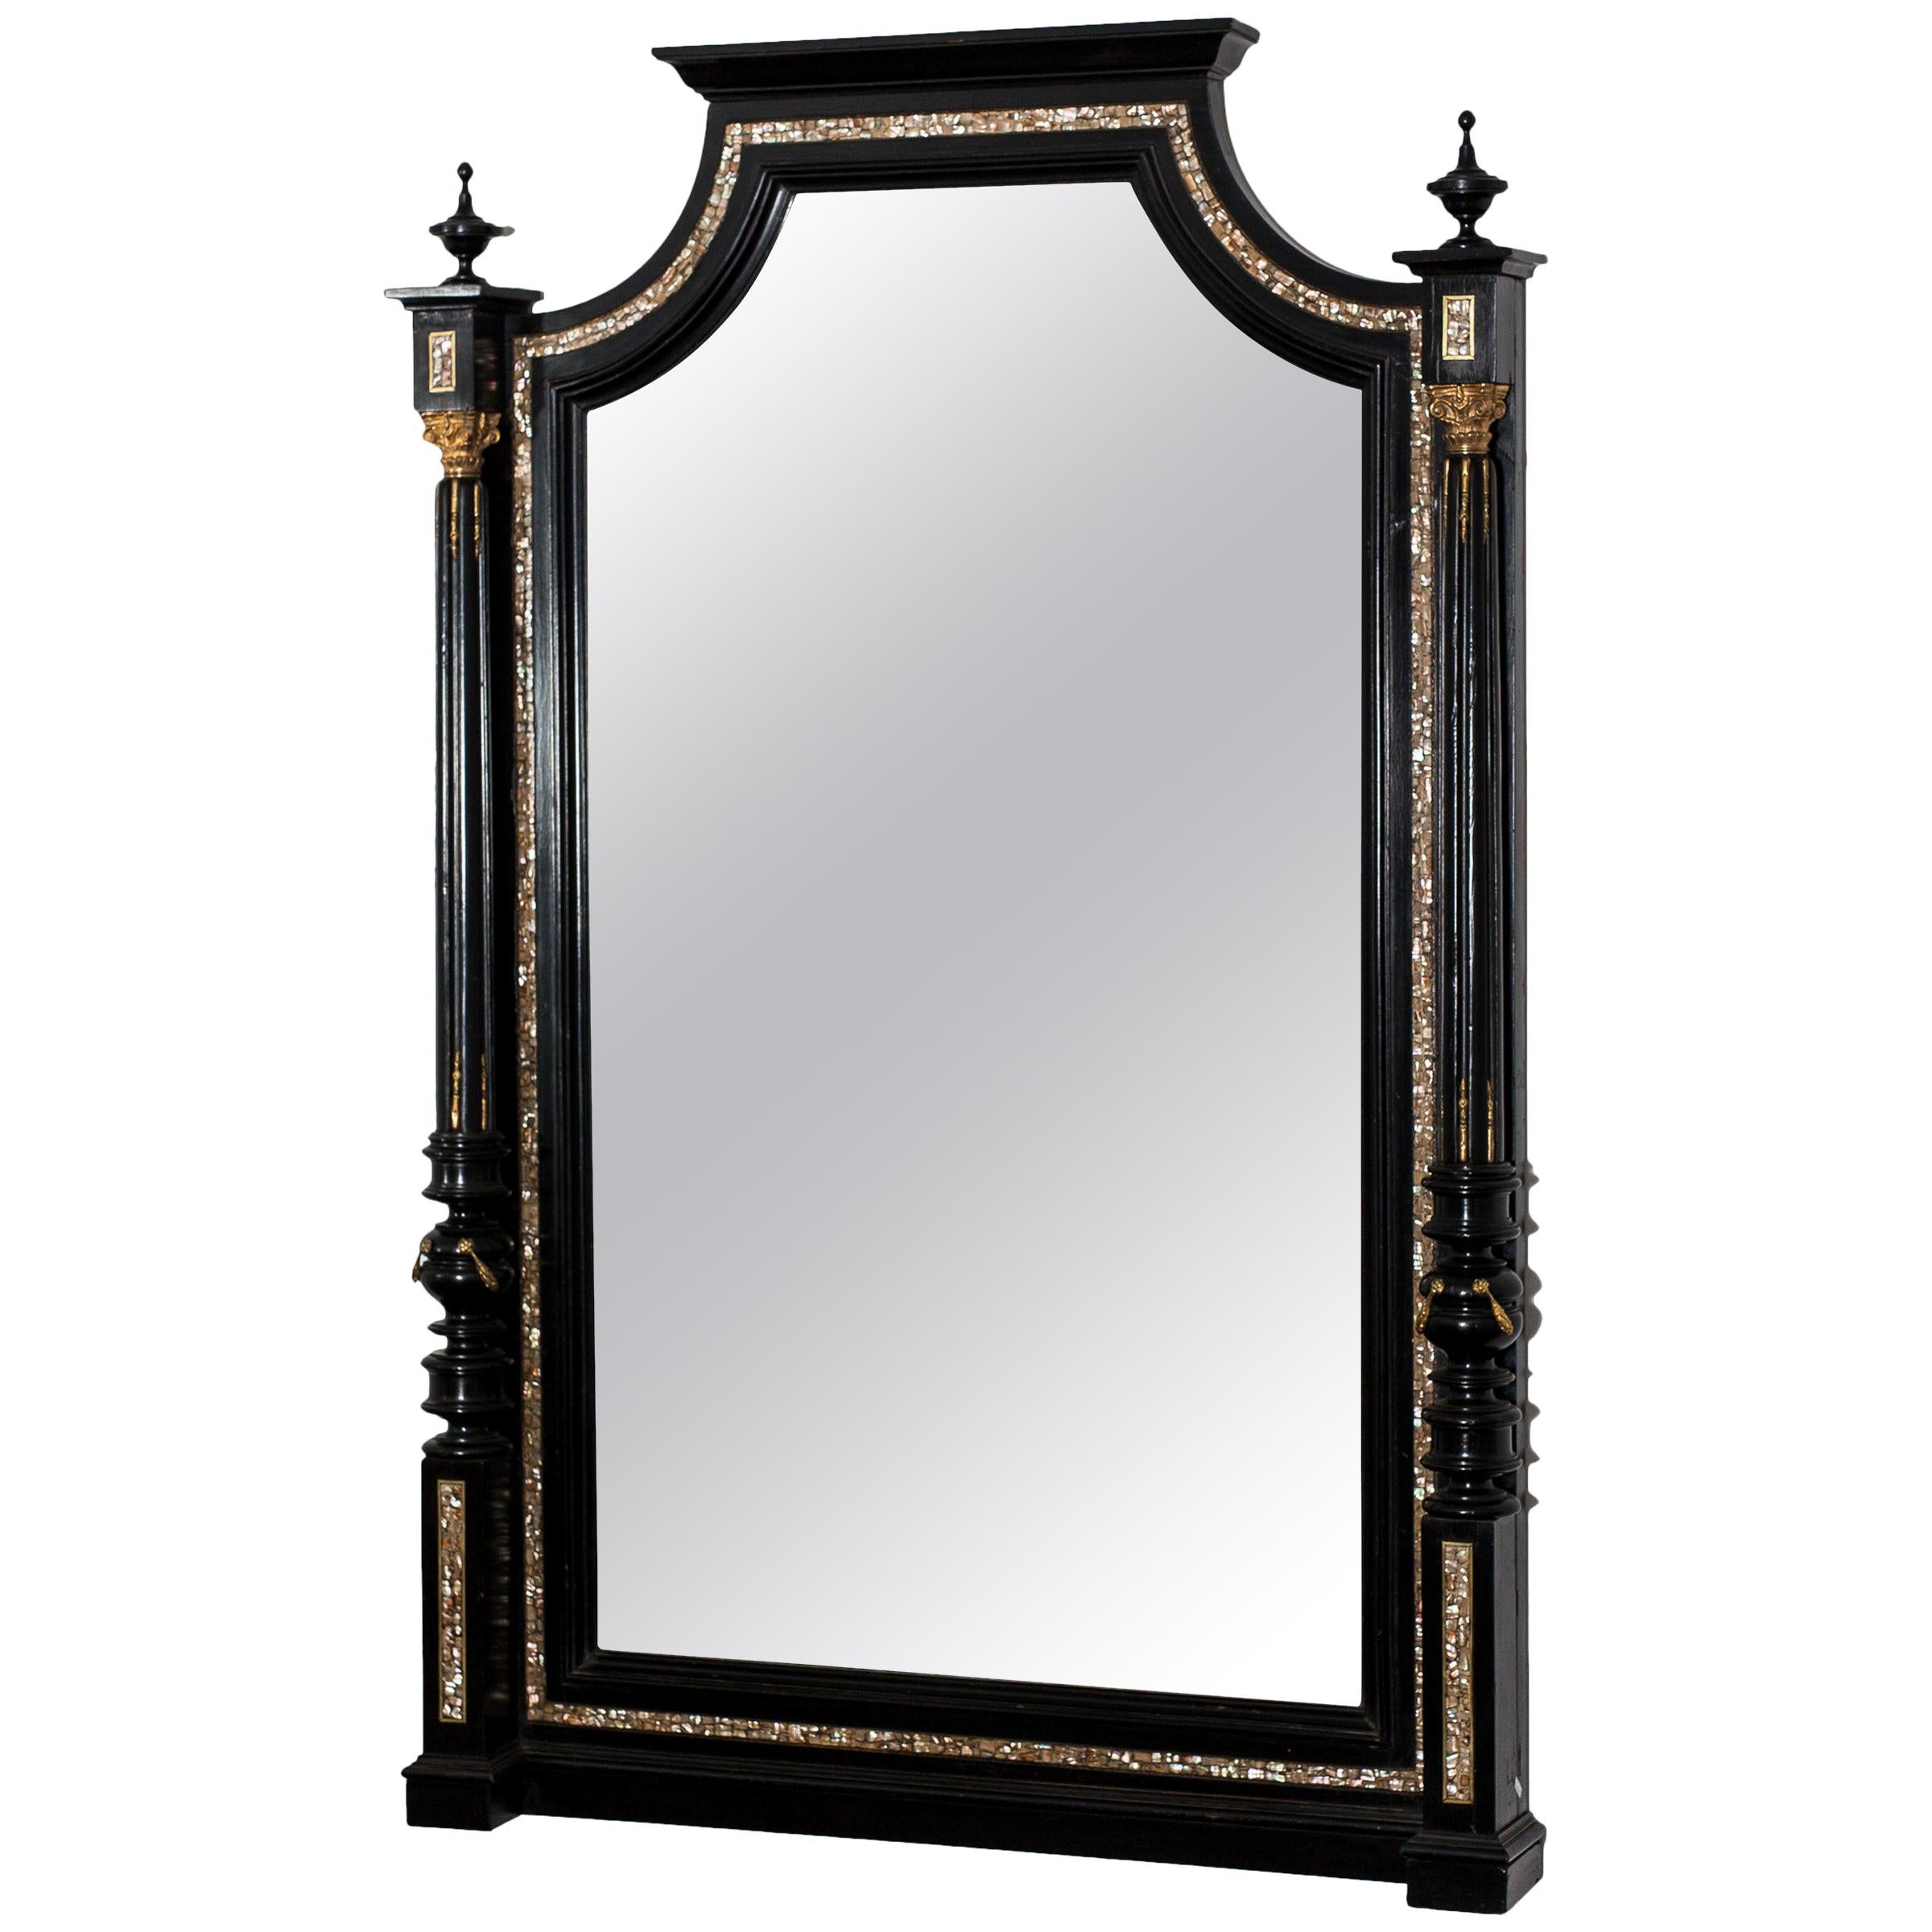 Black Makart Mirror with Mother of Pearl Inlays, Austria, circa 1880